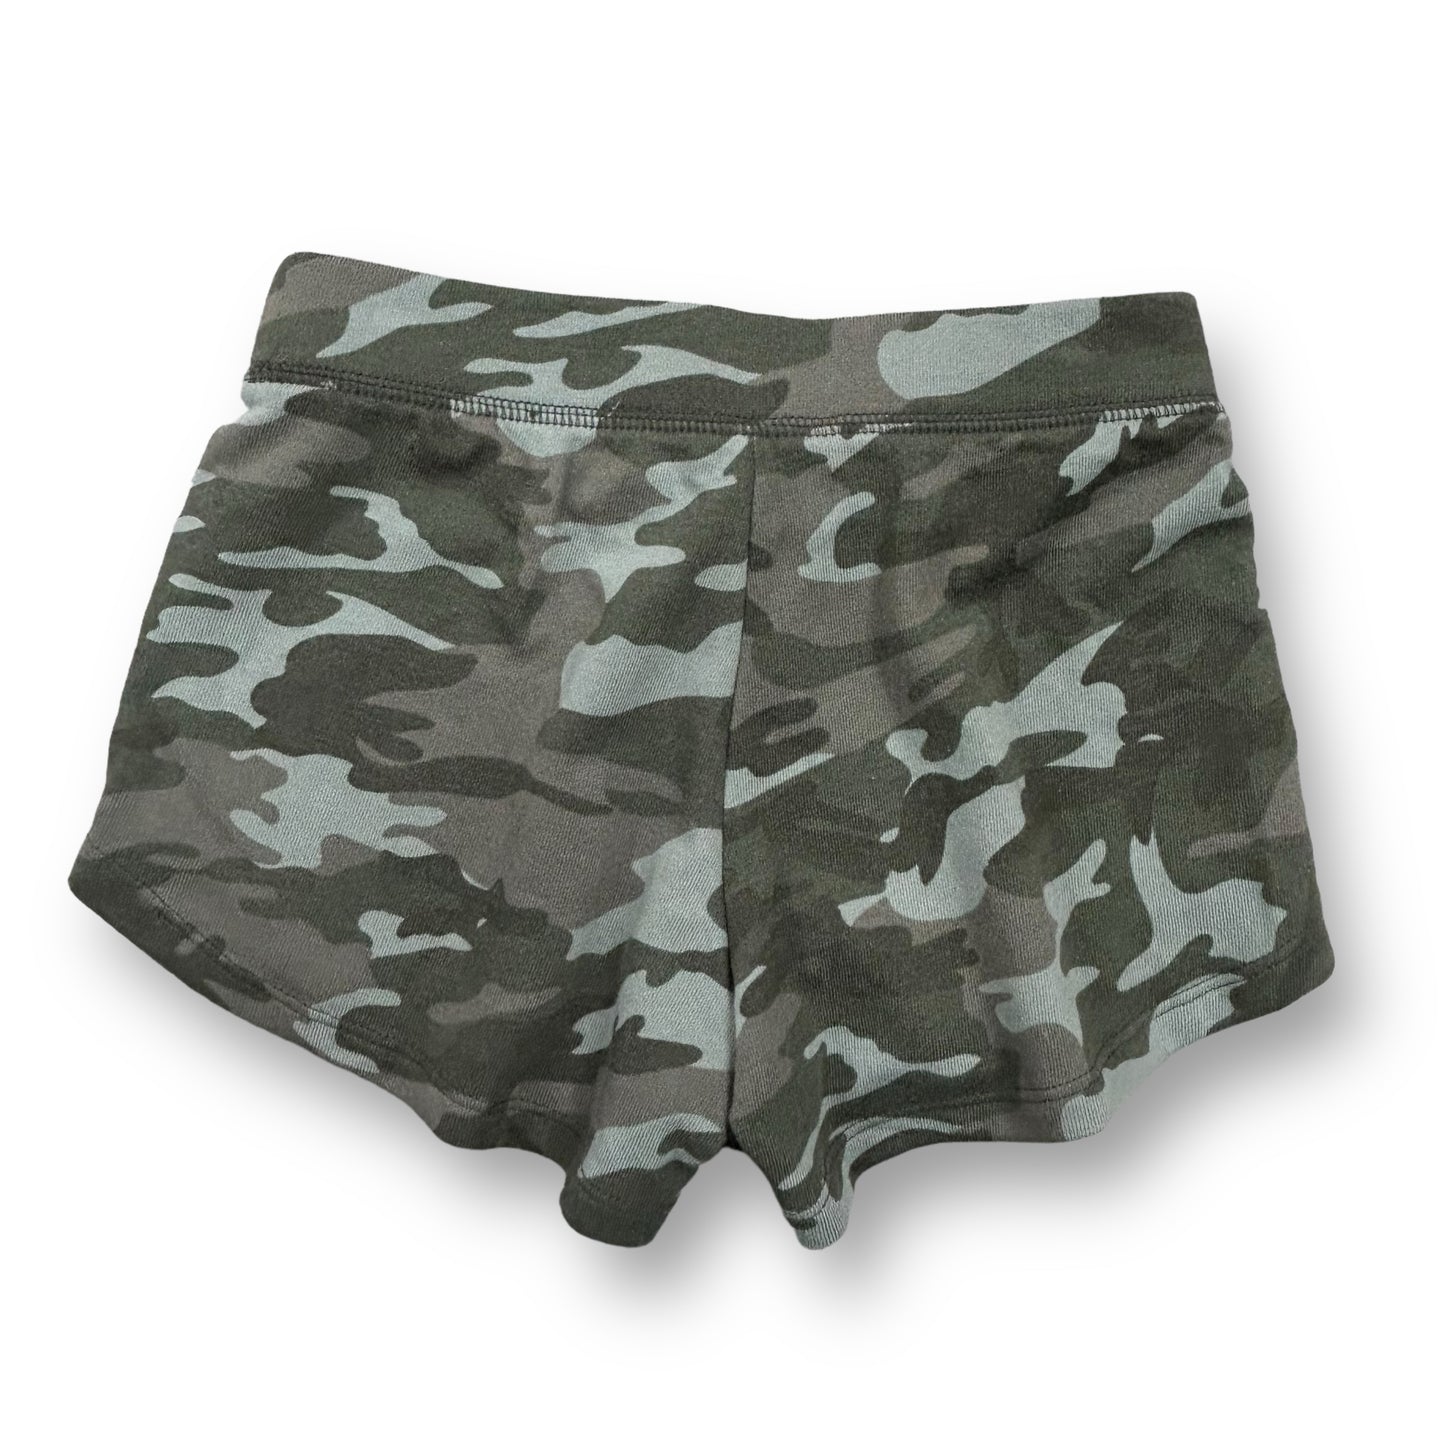 Girls Justice Size 10 Green Soft Knit Pull-On Camo Shorts